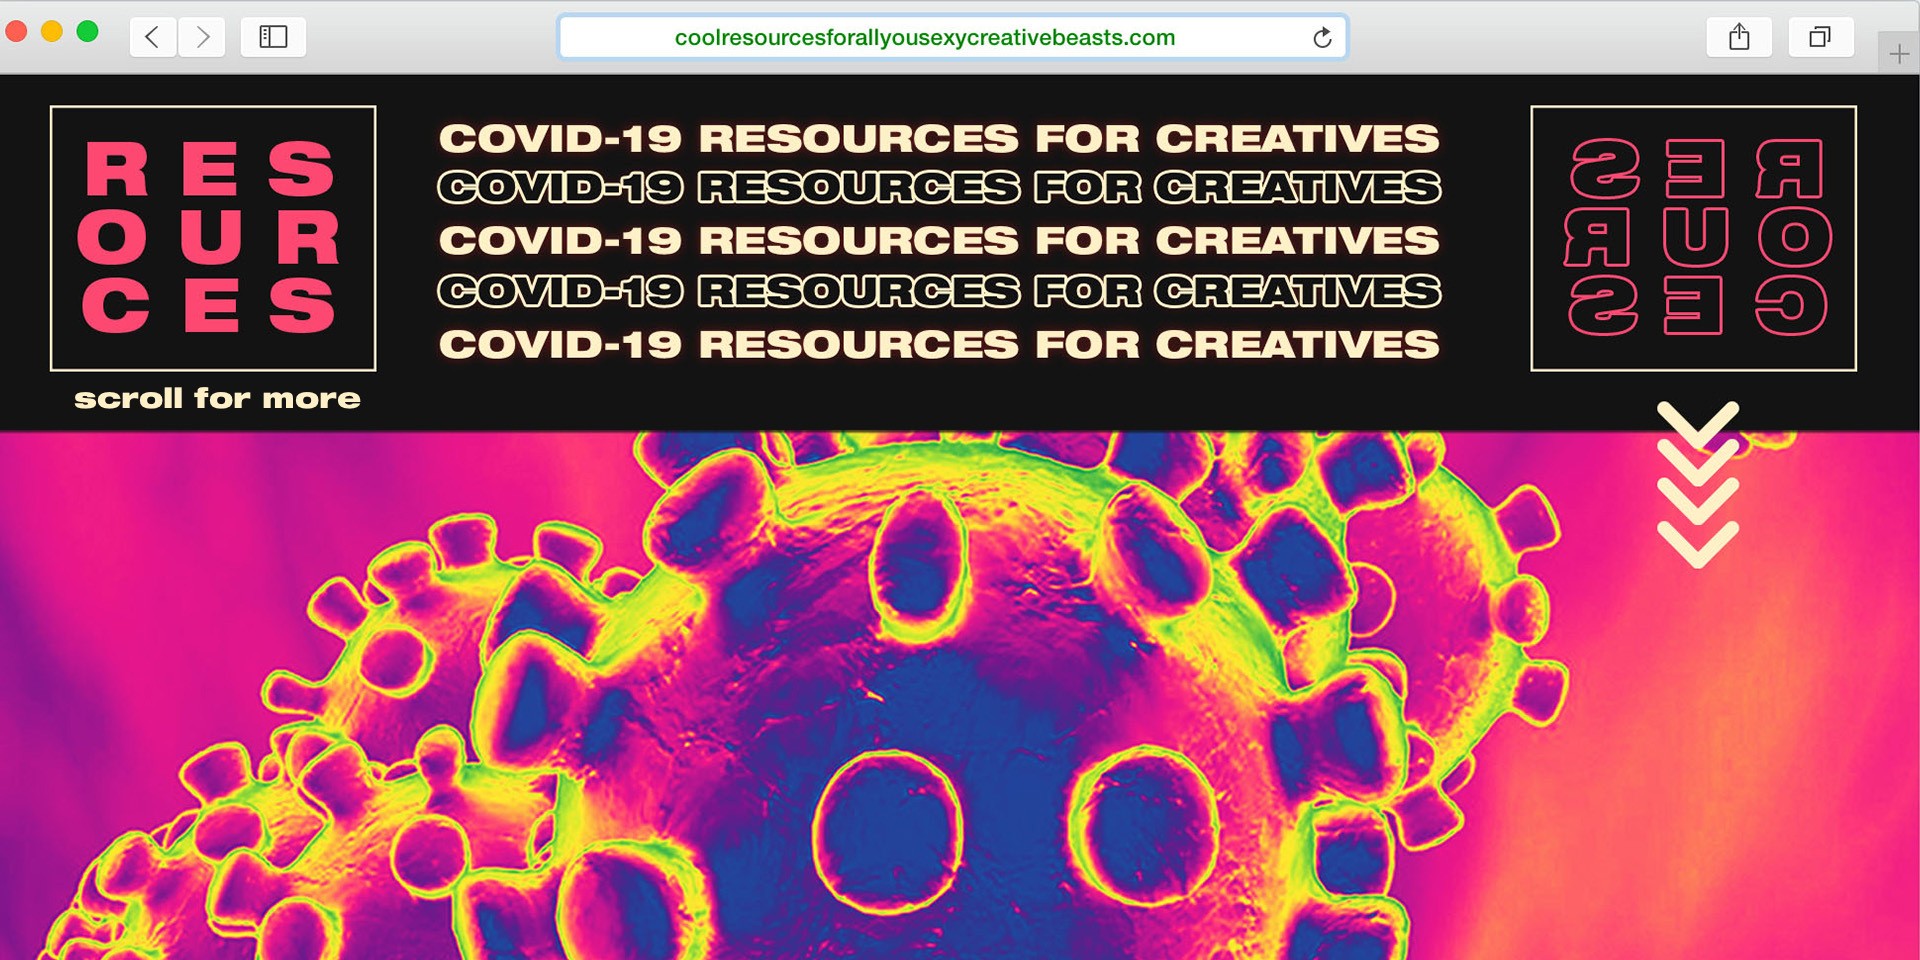 COVID-19 resources for creatives